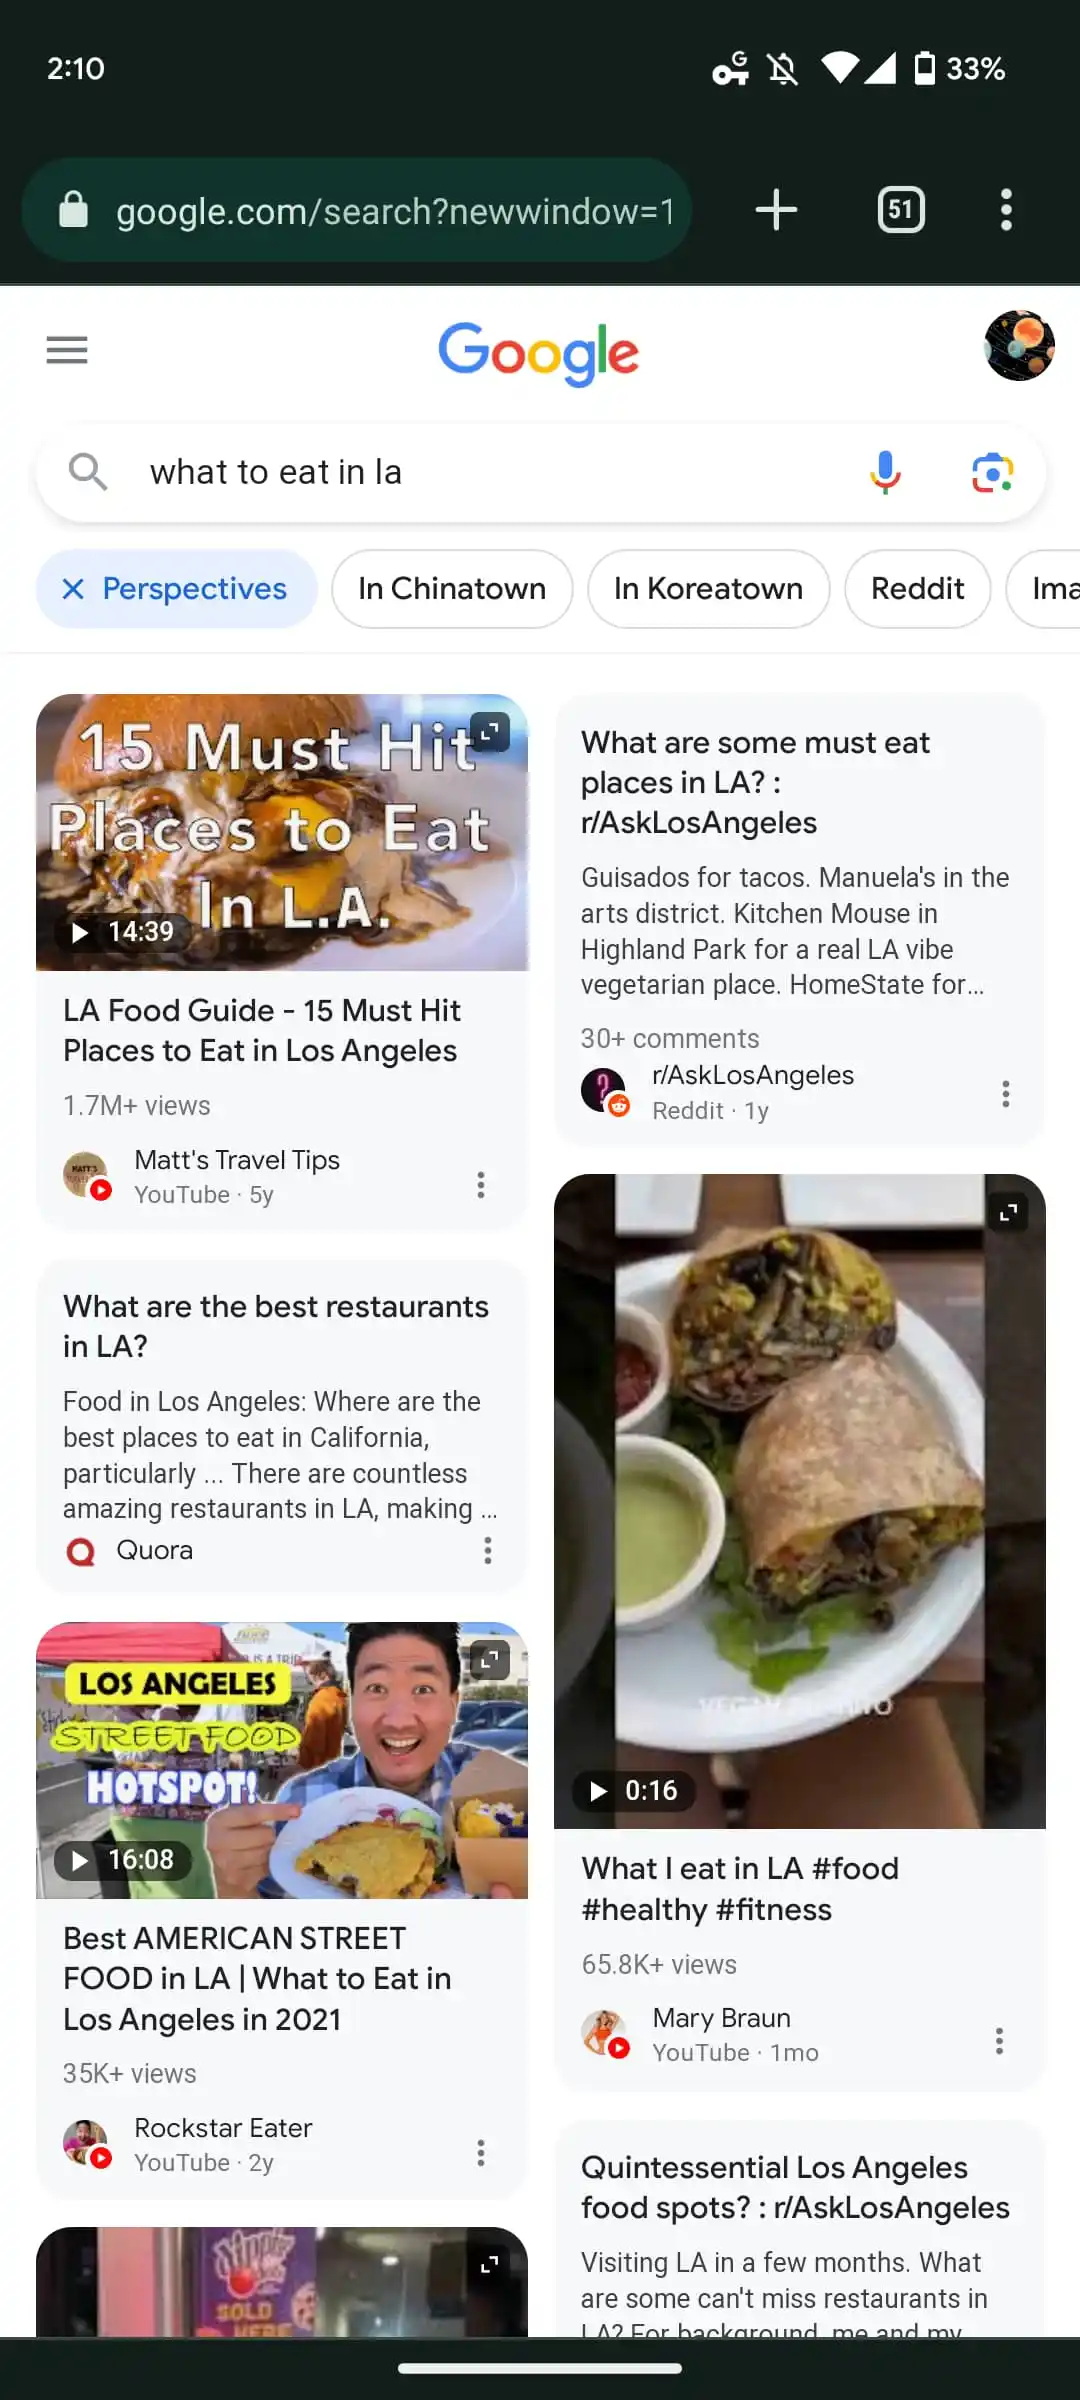 An image showing Google perspectives for the query "what to eat in LA"